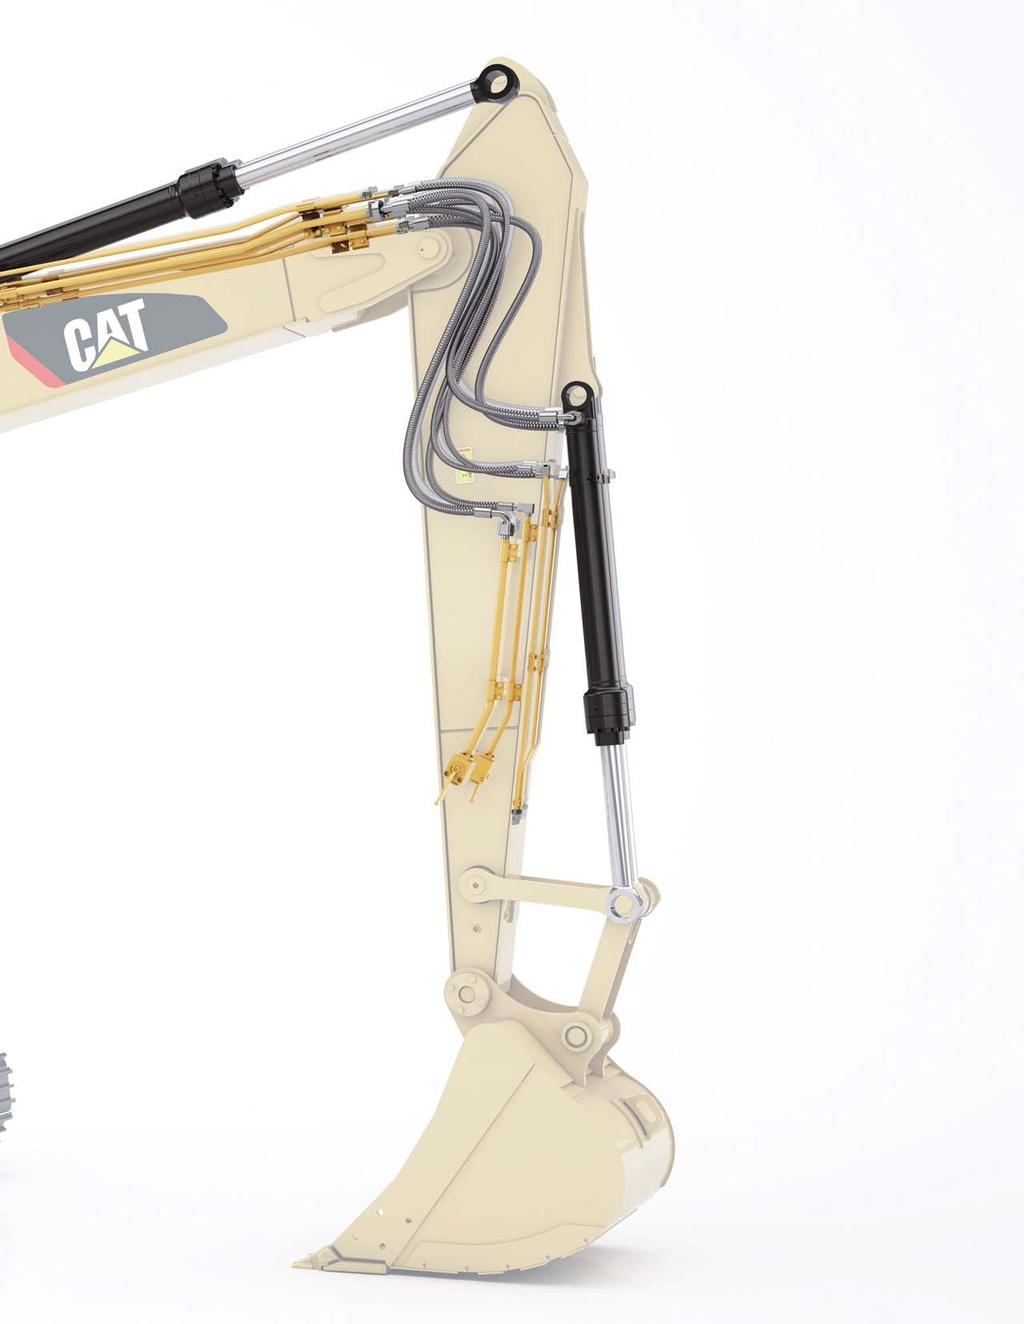 Hydraulic System One of the biggest contributors to your productivity and fuel savings is a welldesigned hydraulic system, and this is where Cat excavators stand apart.